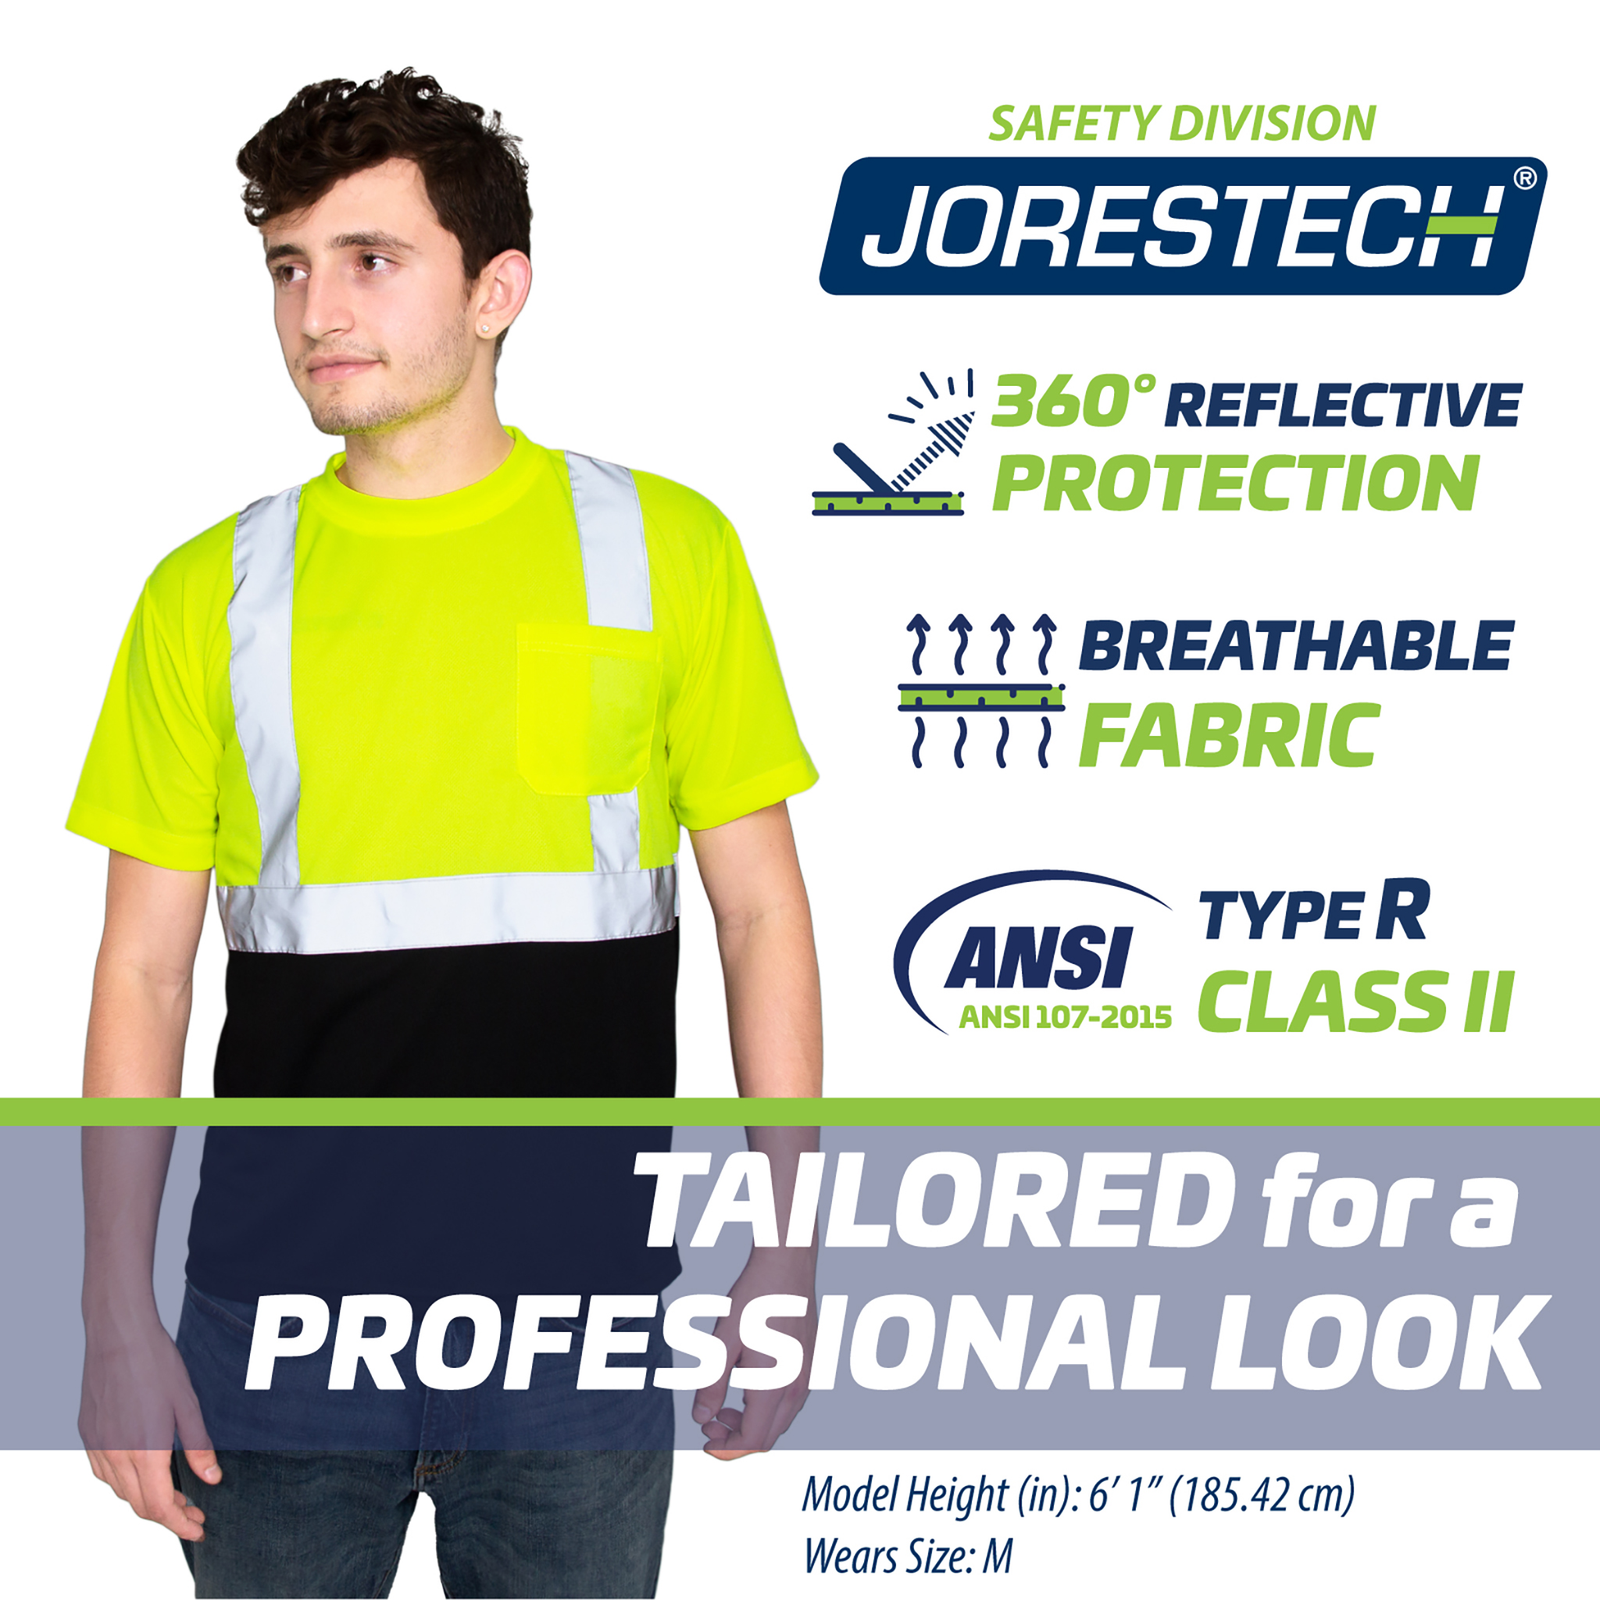 A worker wearing the Jorestech yellow/black safety shirt. Ions with text read: 360 degrees of reflective protection. Breathable fabric. Type R class II. Tailored for a professional look.